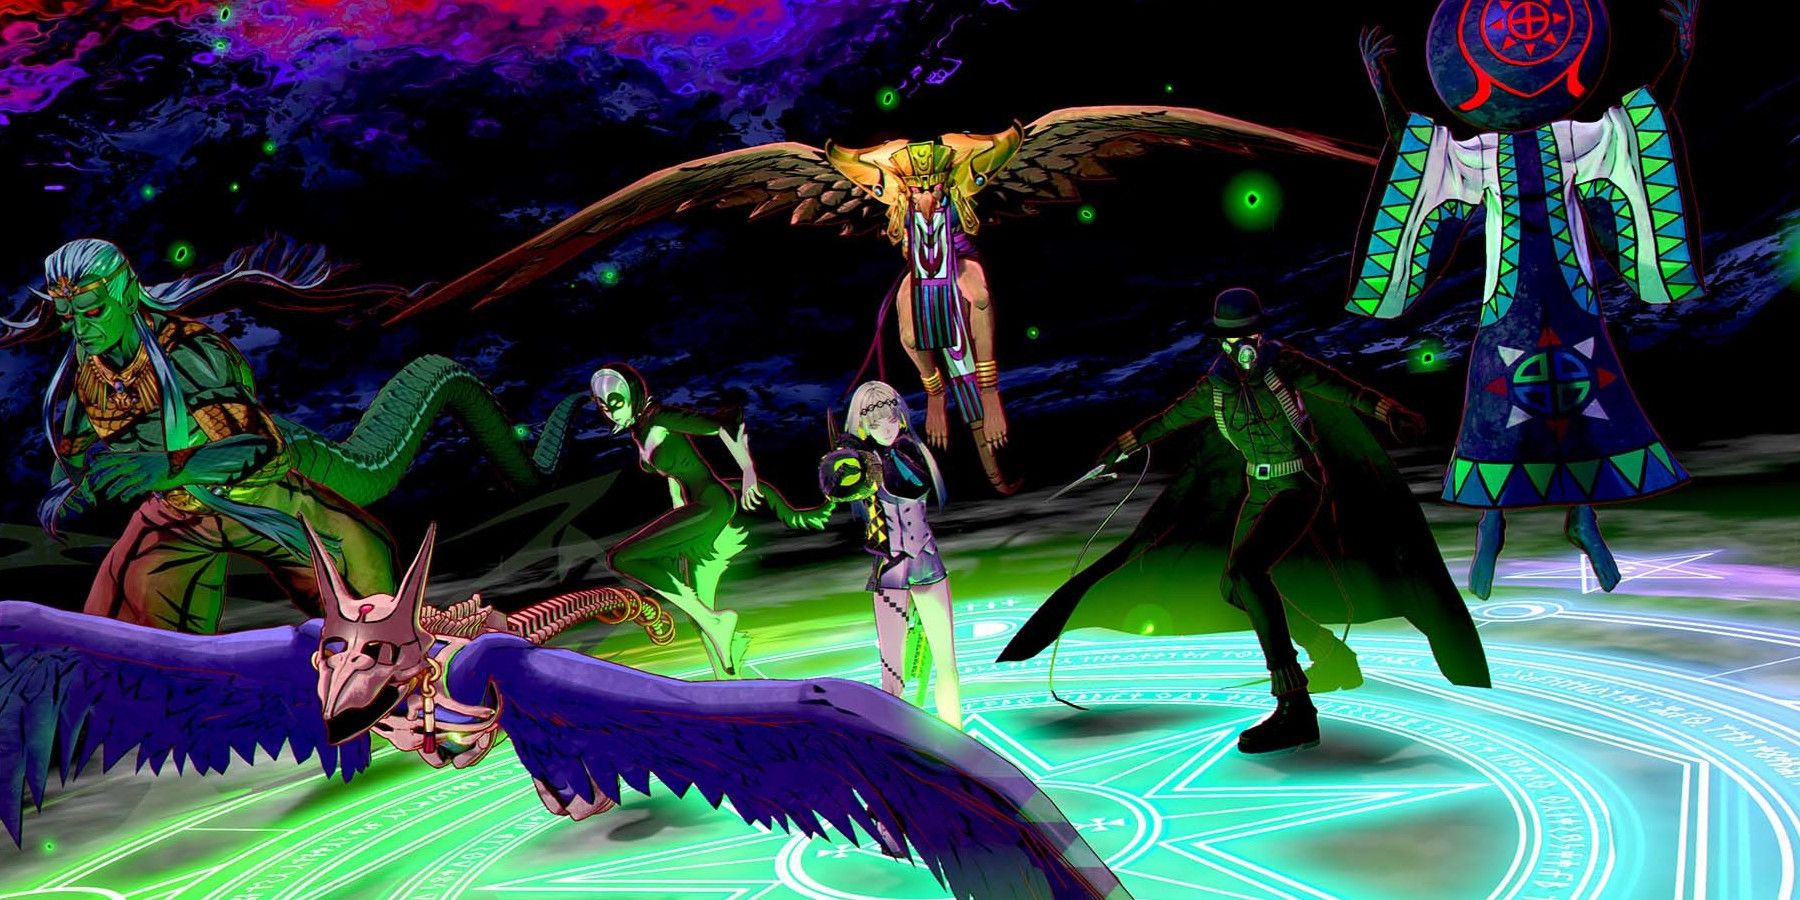 Atlus' Best Work Yet: How Soul Hackers 2 Gameplay Raises The Bar